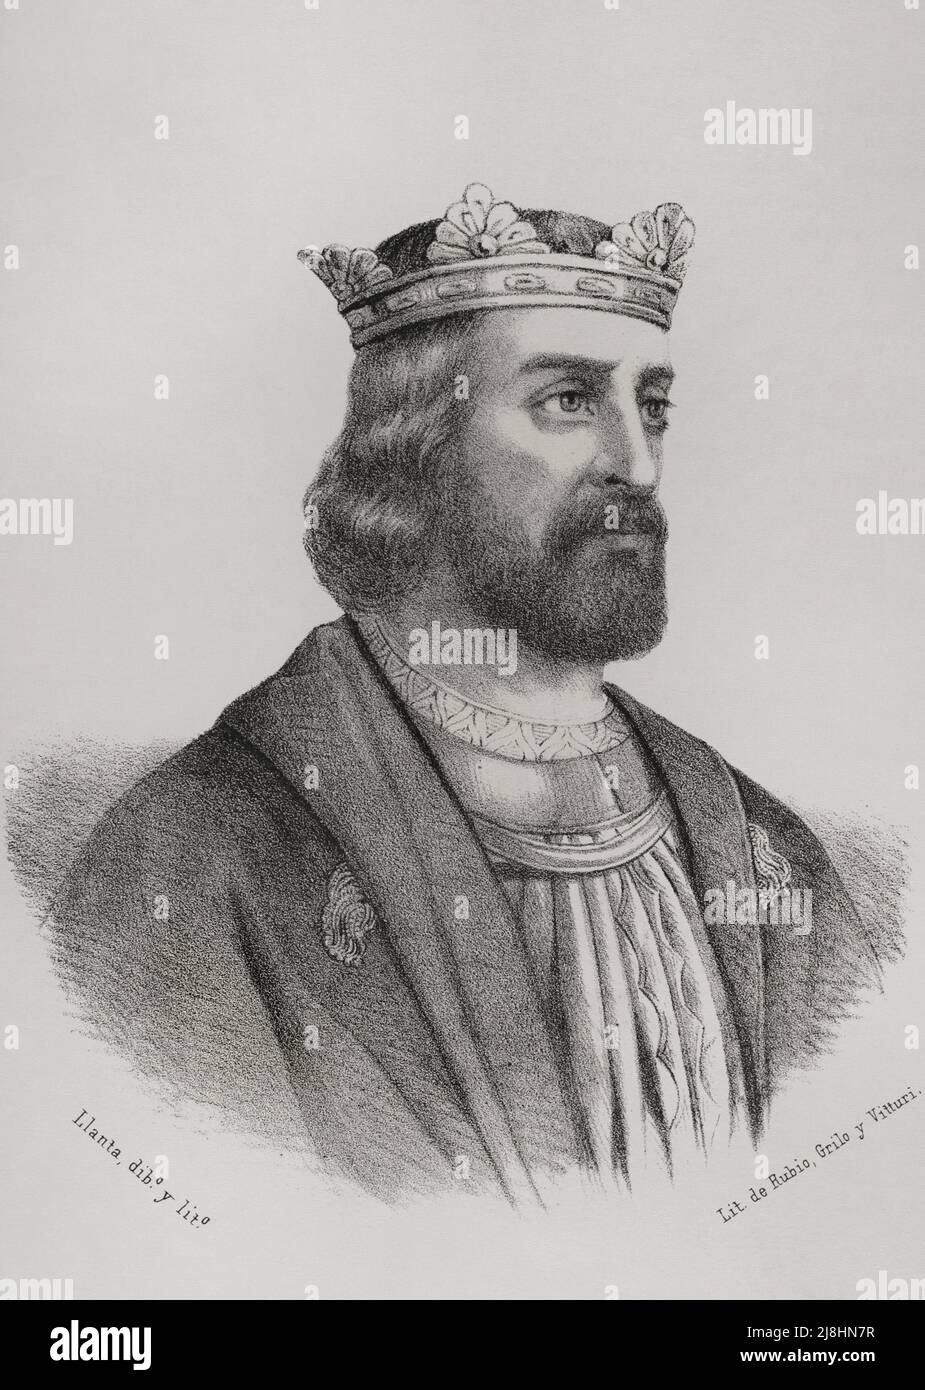 Alfonso VI of Leon (1040-1109). King of Leon (1065-1070) and king of Castile and Leon (1072-1109). Called the Brave. Portrait, 19th century. Stock Photo